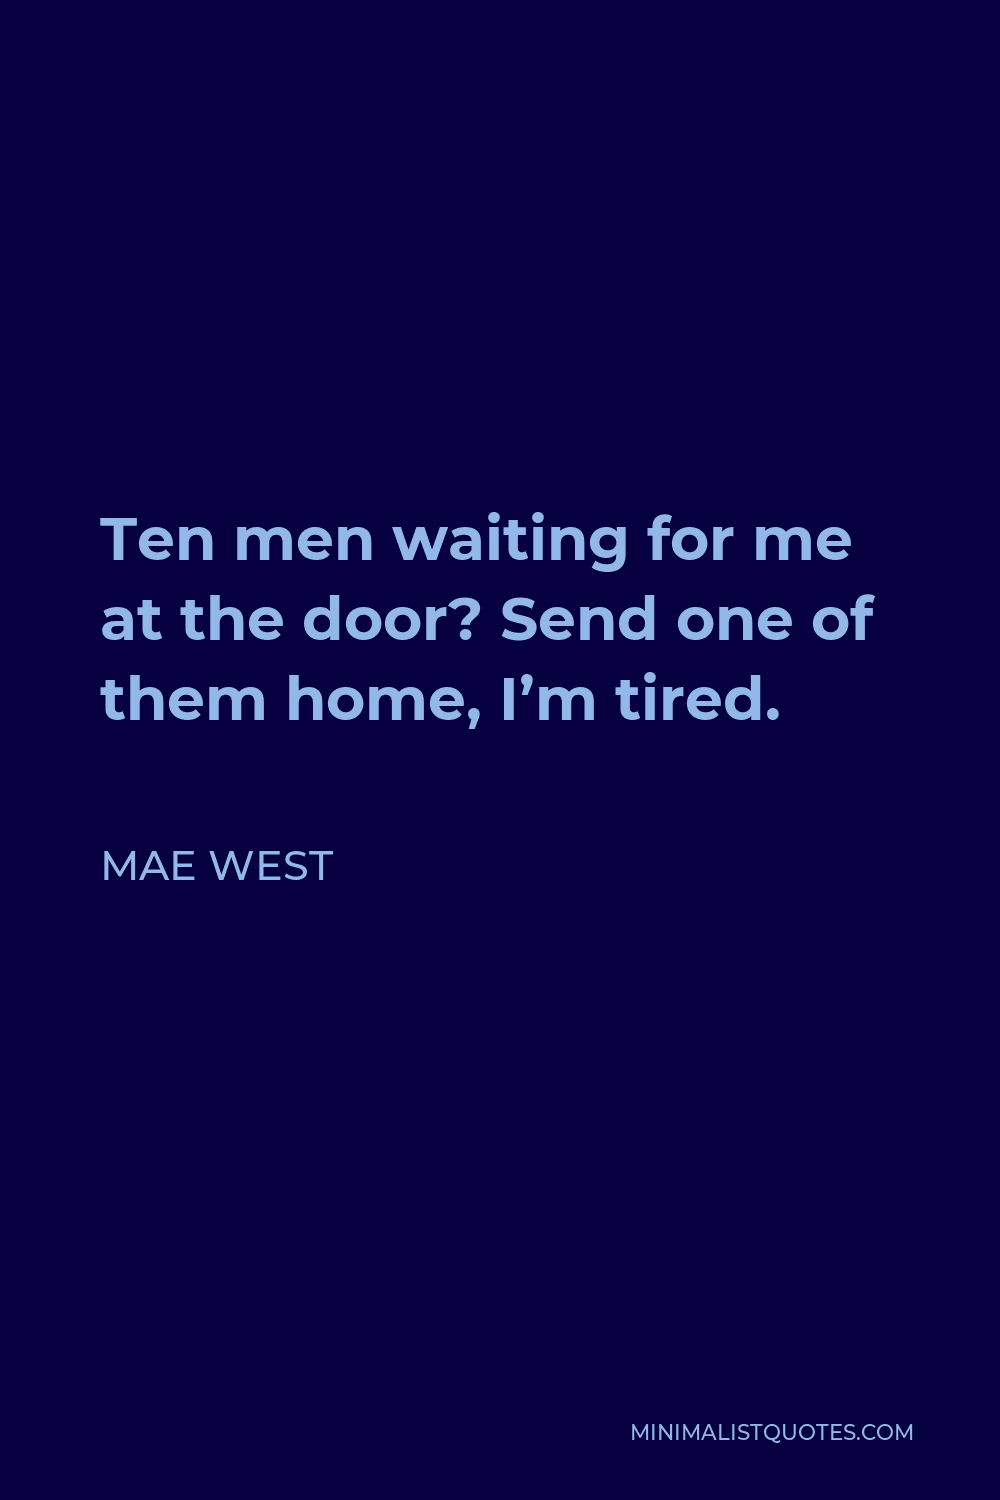 Mae West Quote - Ten men waiting for me at the door? Send one of them home, I’m tired.